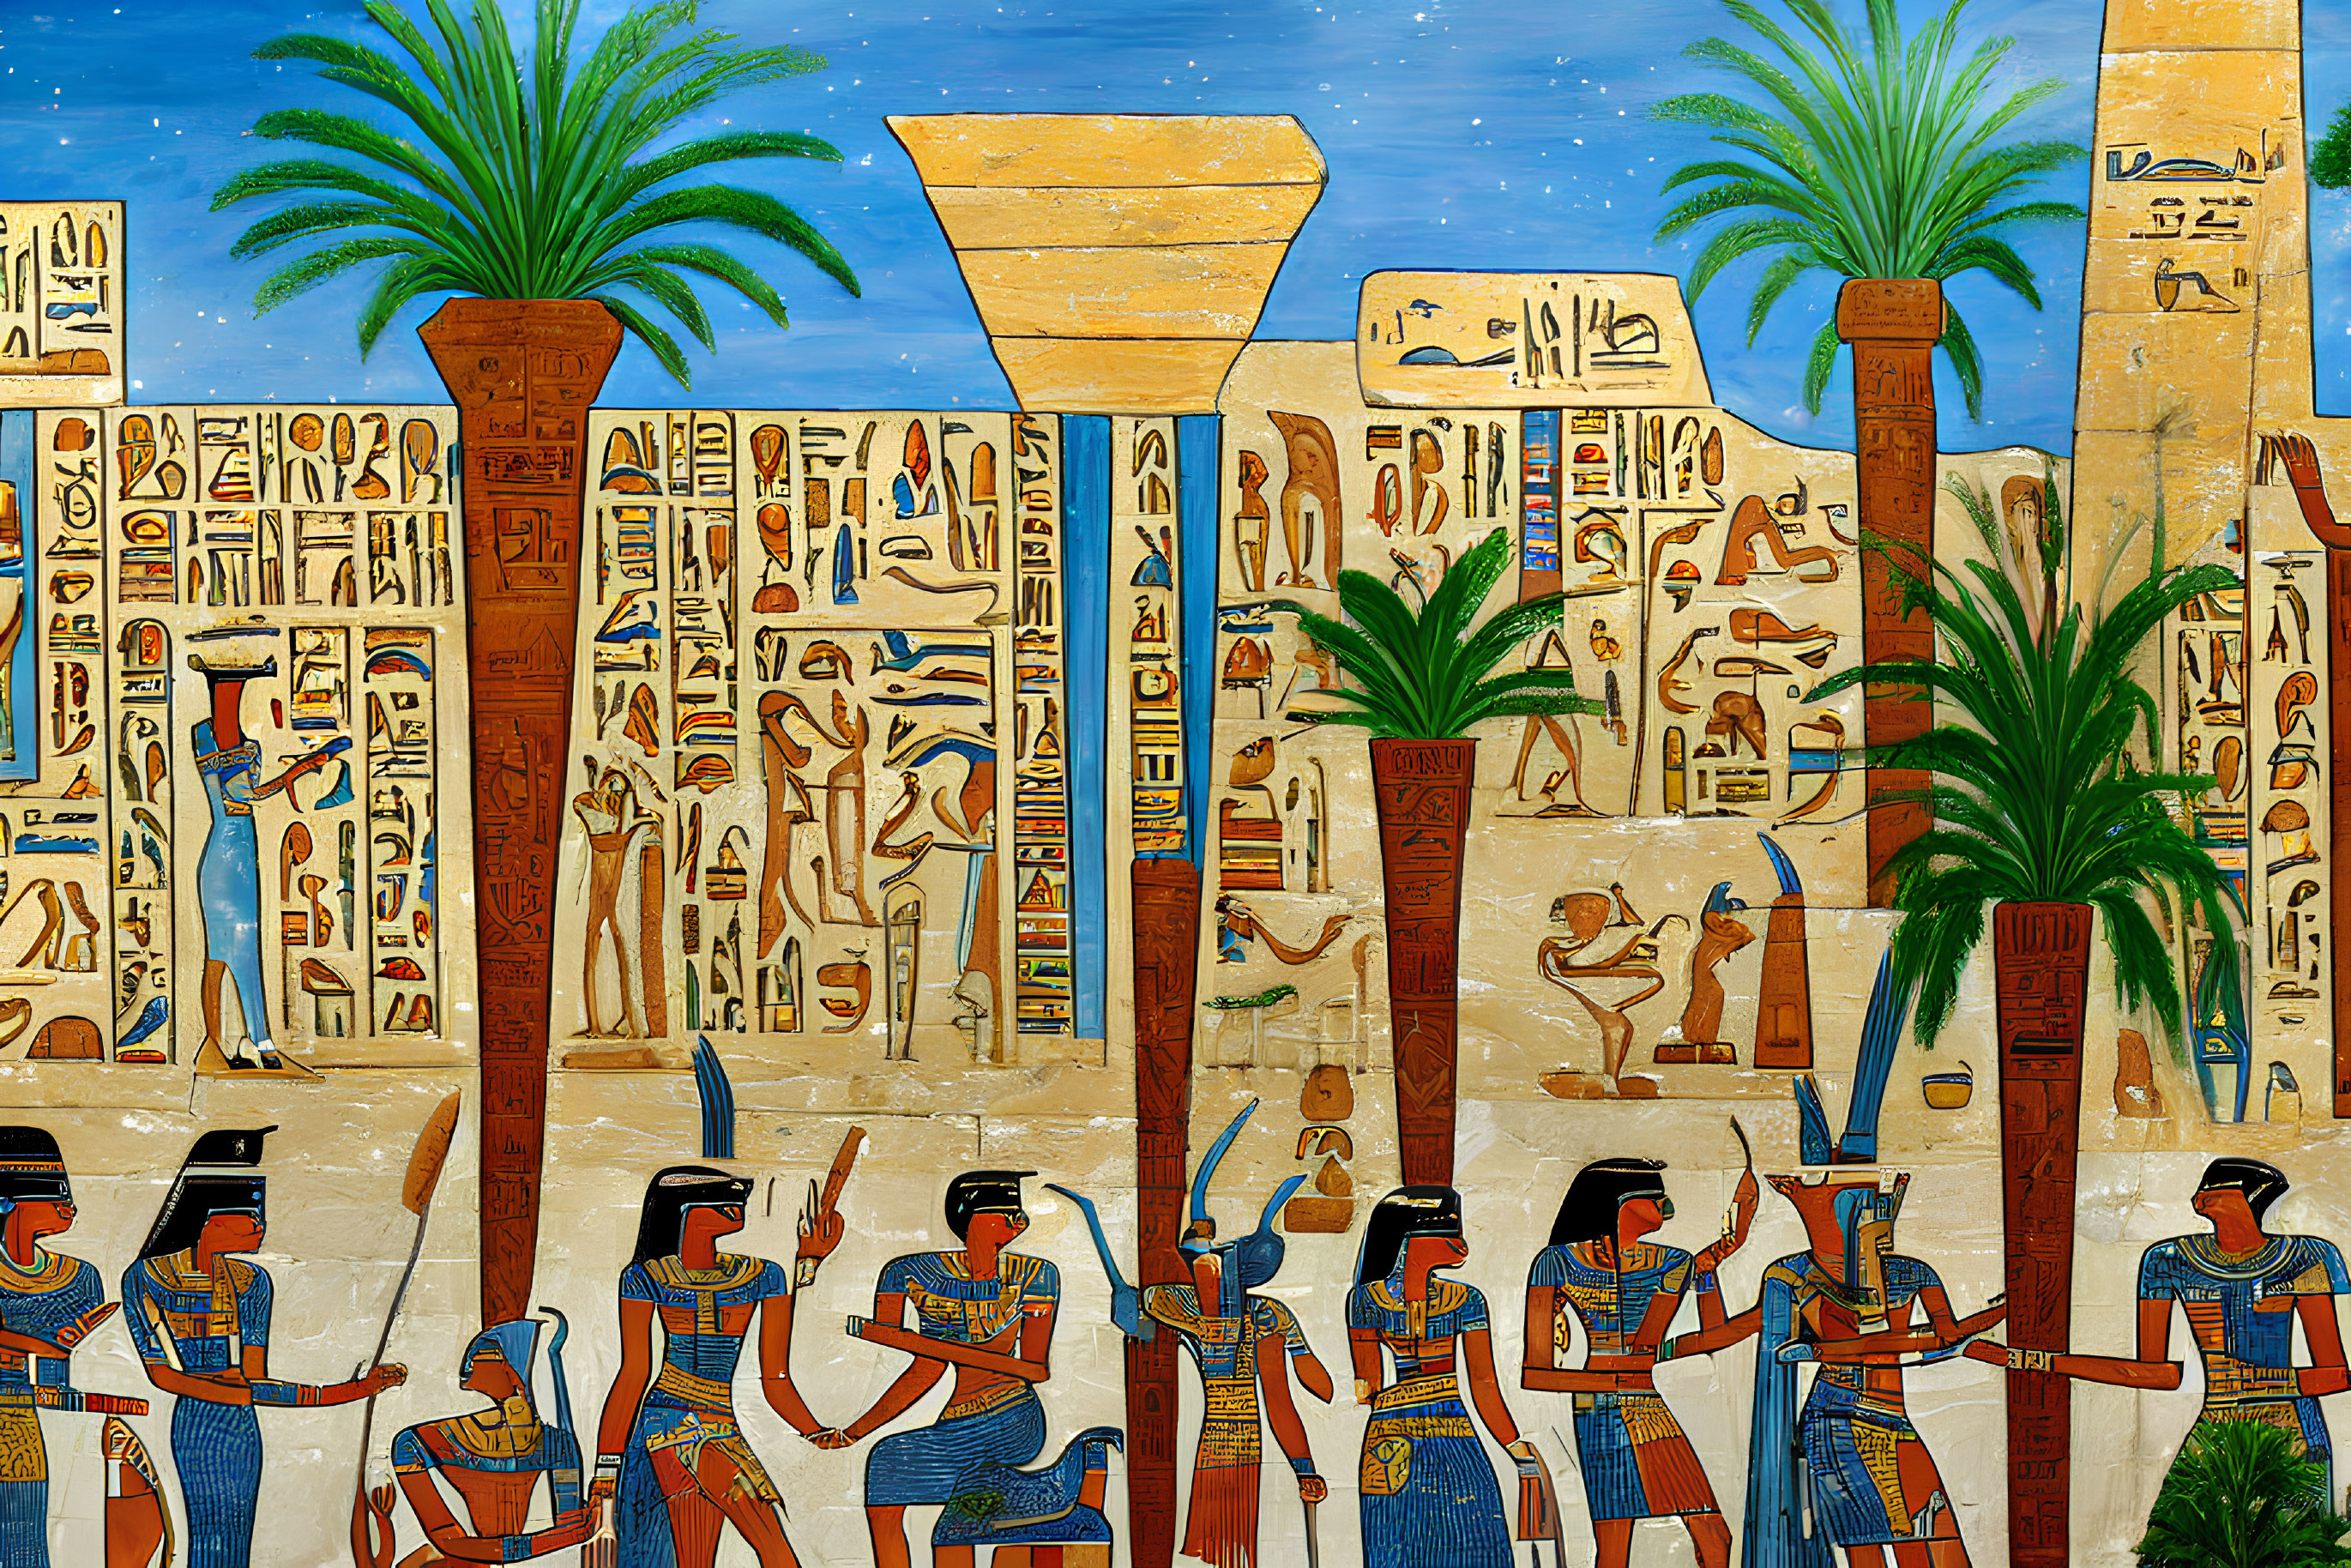 Colorful Ancient Egyptian Artwork Featuring Hieroglyphics and Pharaohs